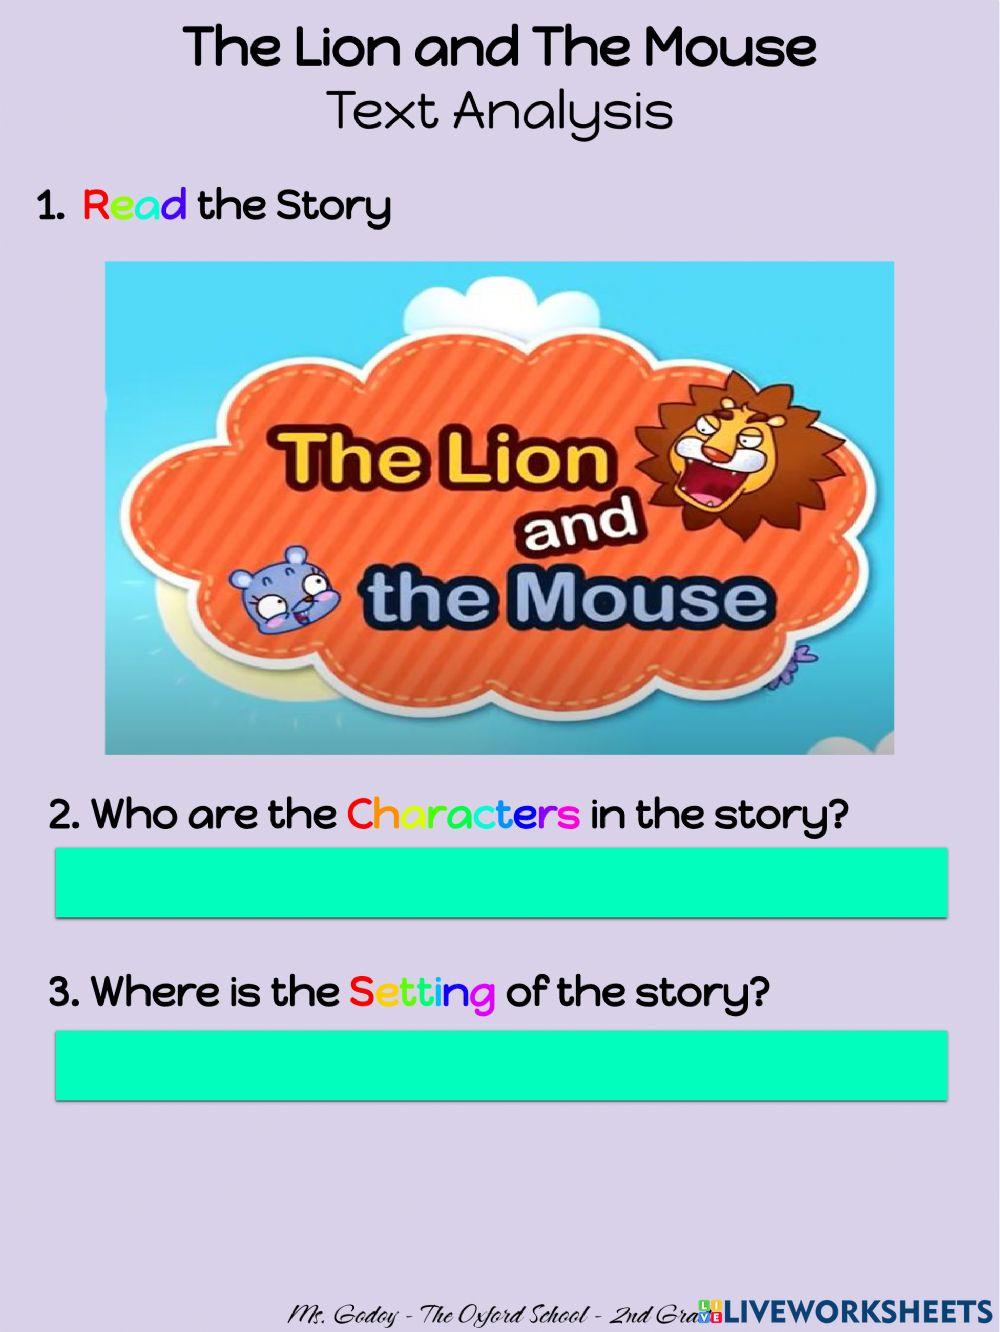 The Lion and The Mouse - Text Analysis